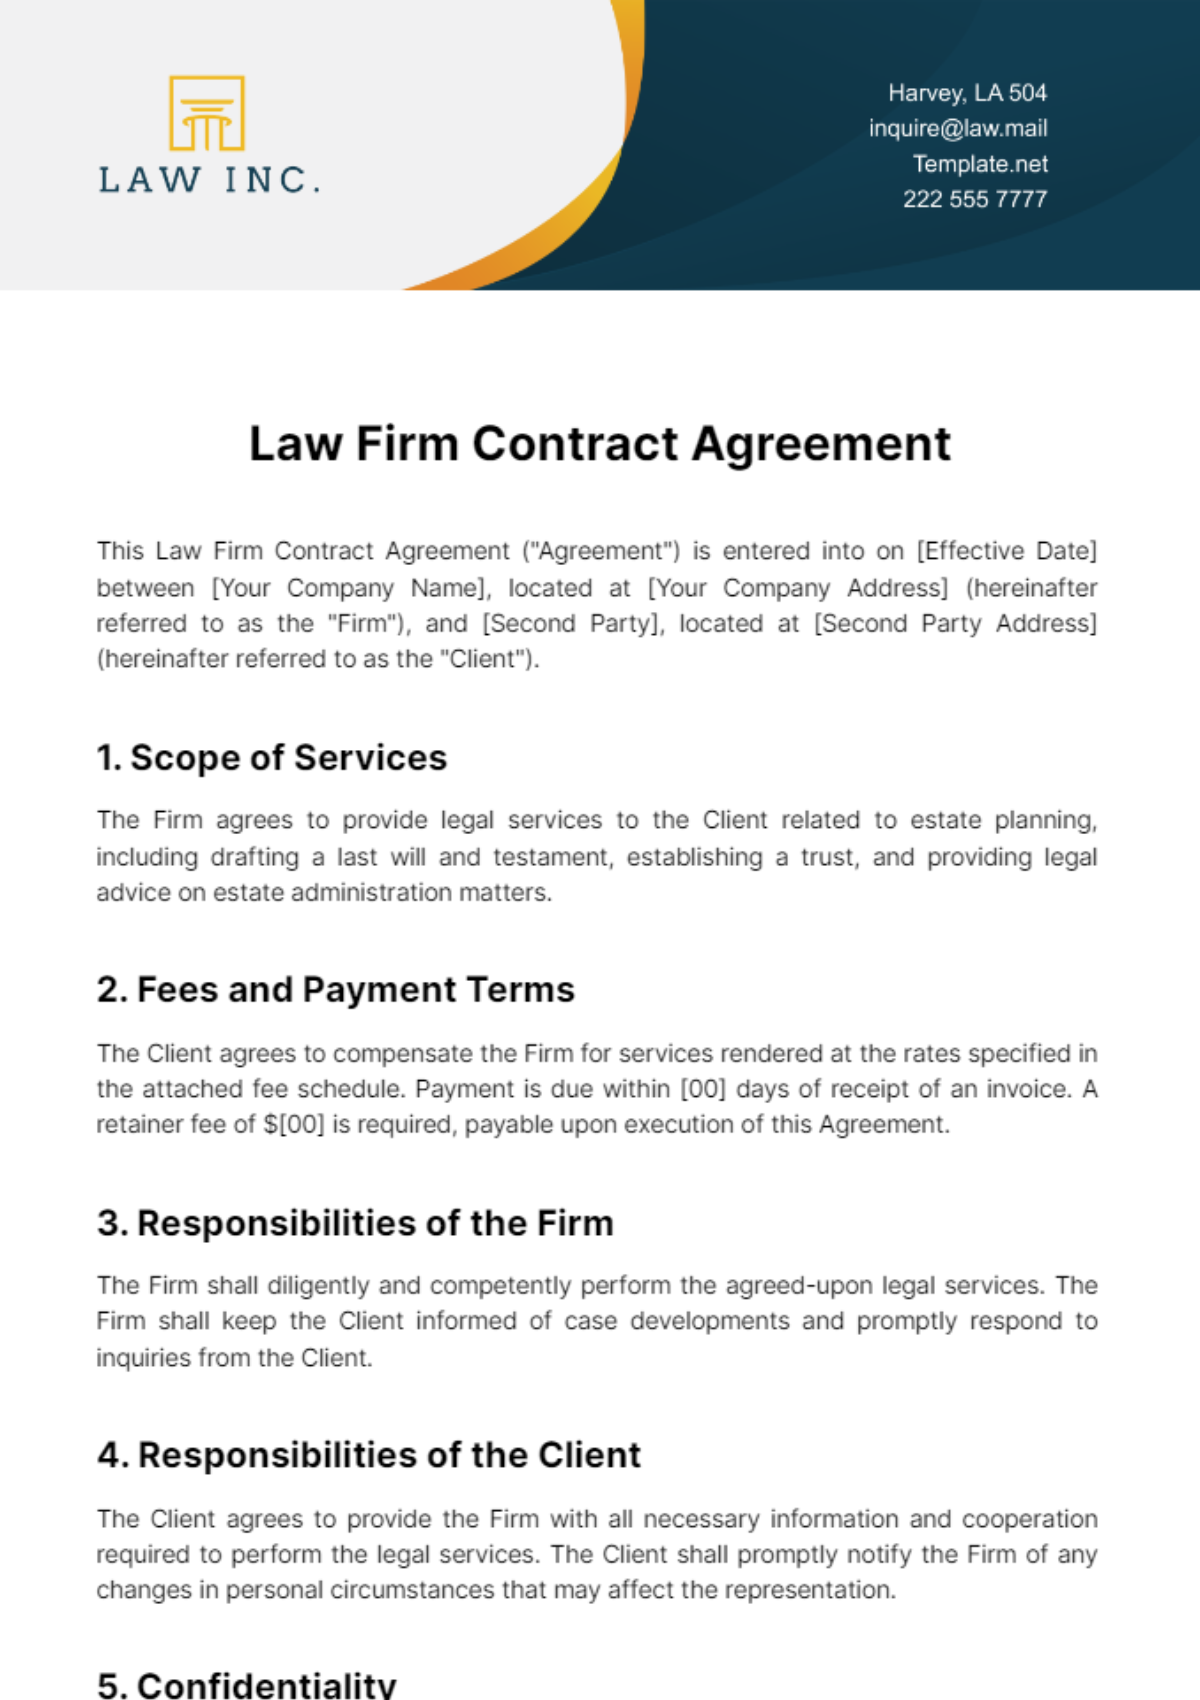 Law Firm Contract Agreement Template